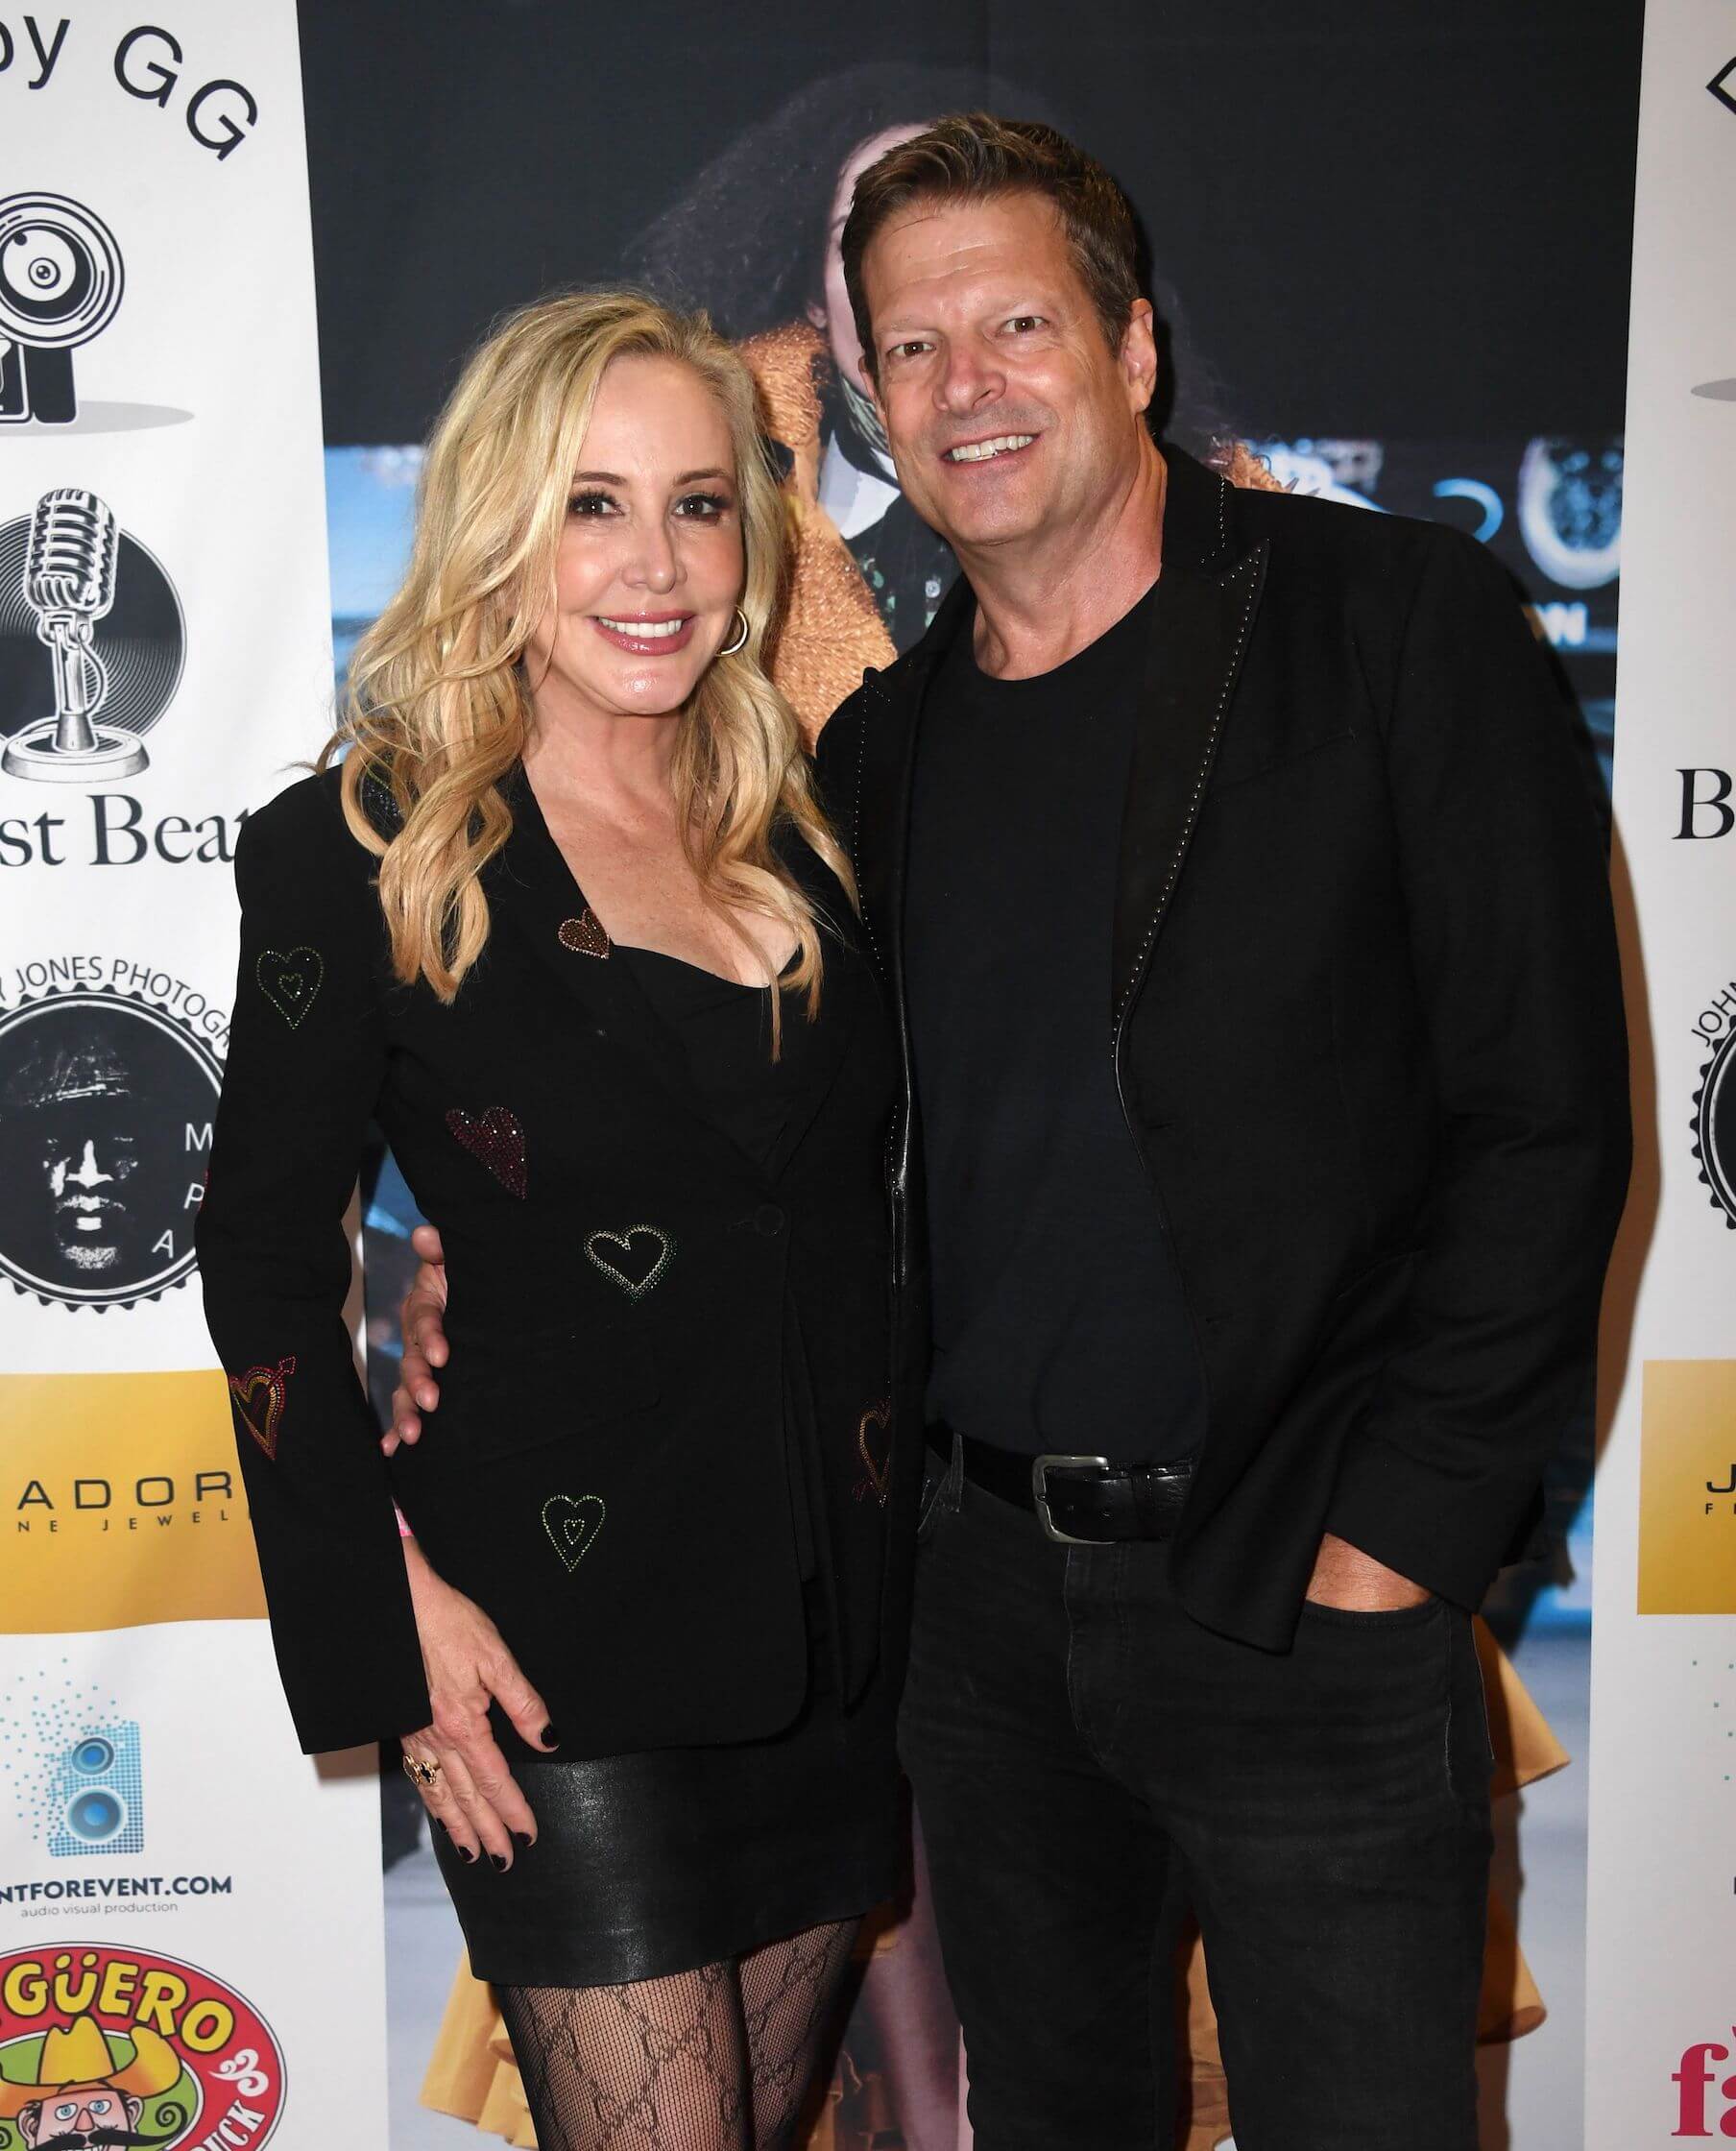 'The Real Housewives of Orange County' stars Shannon Beador and John Janssen smiling with their arms around each other